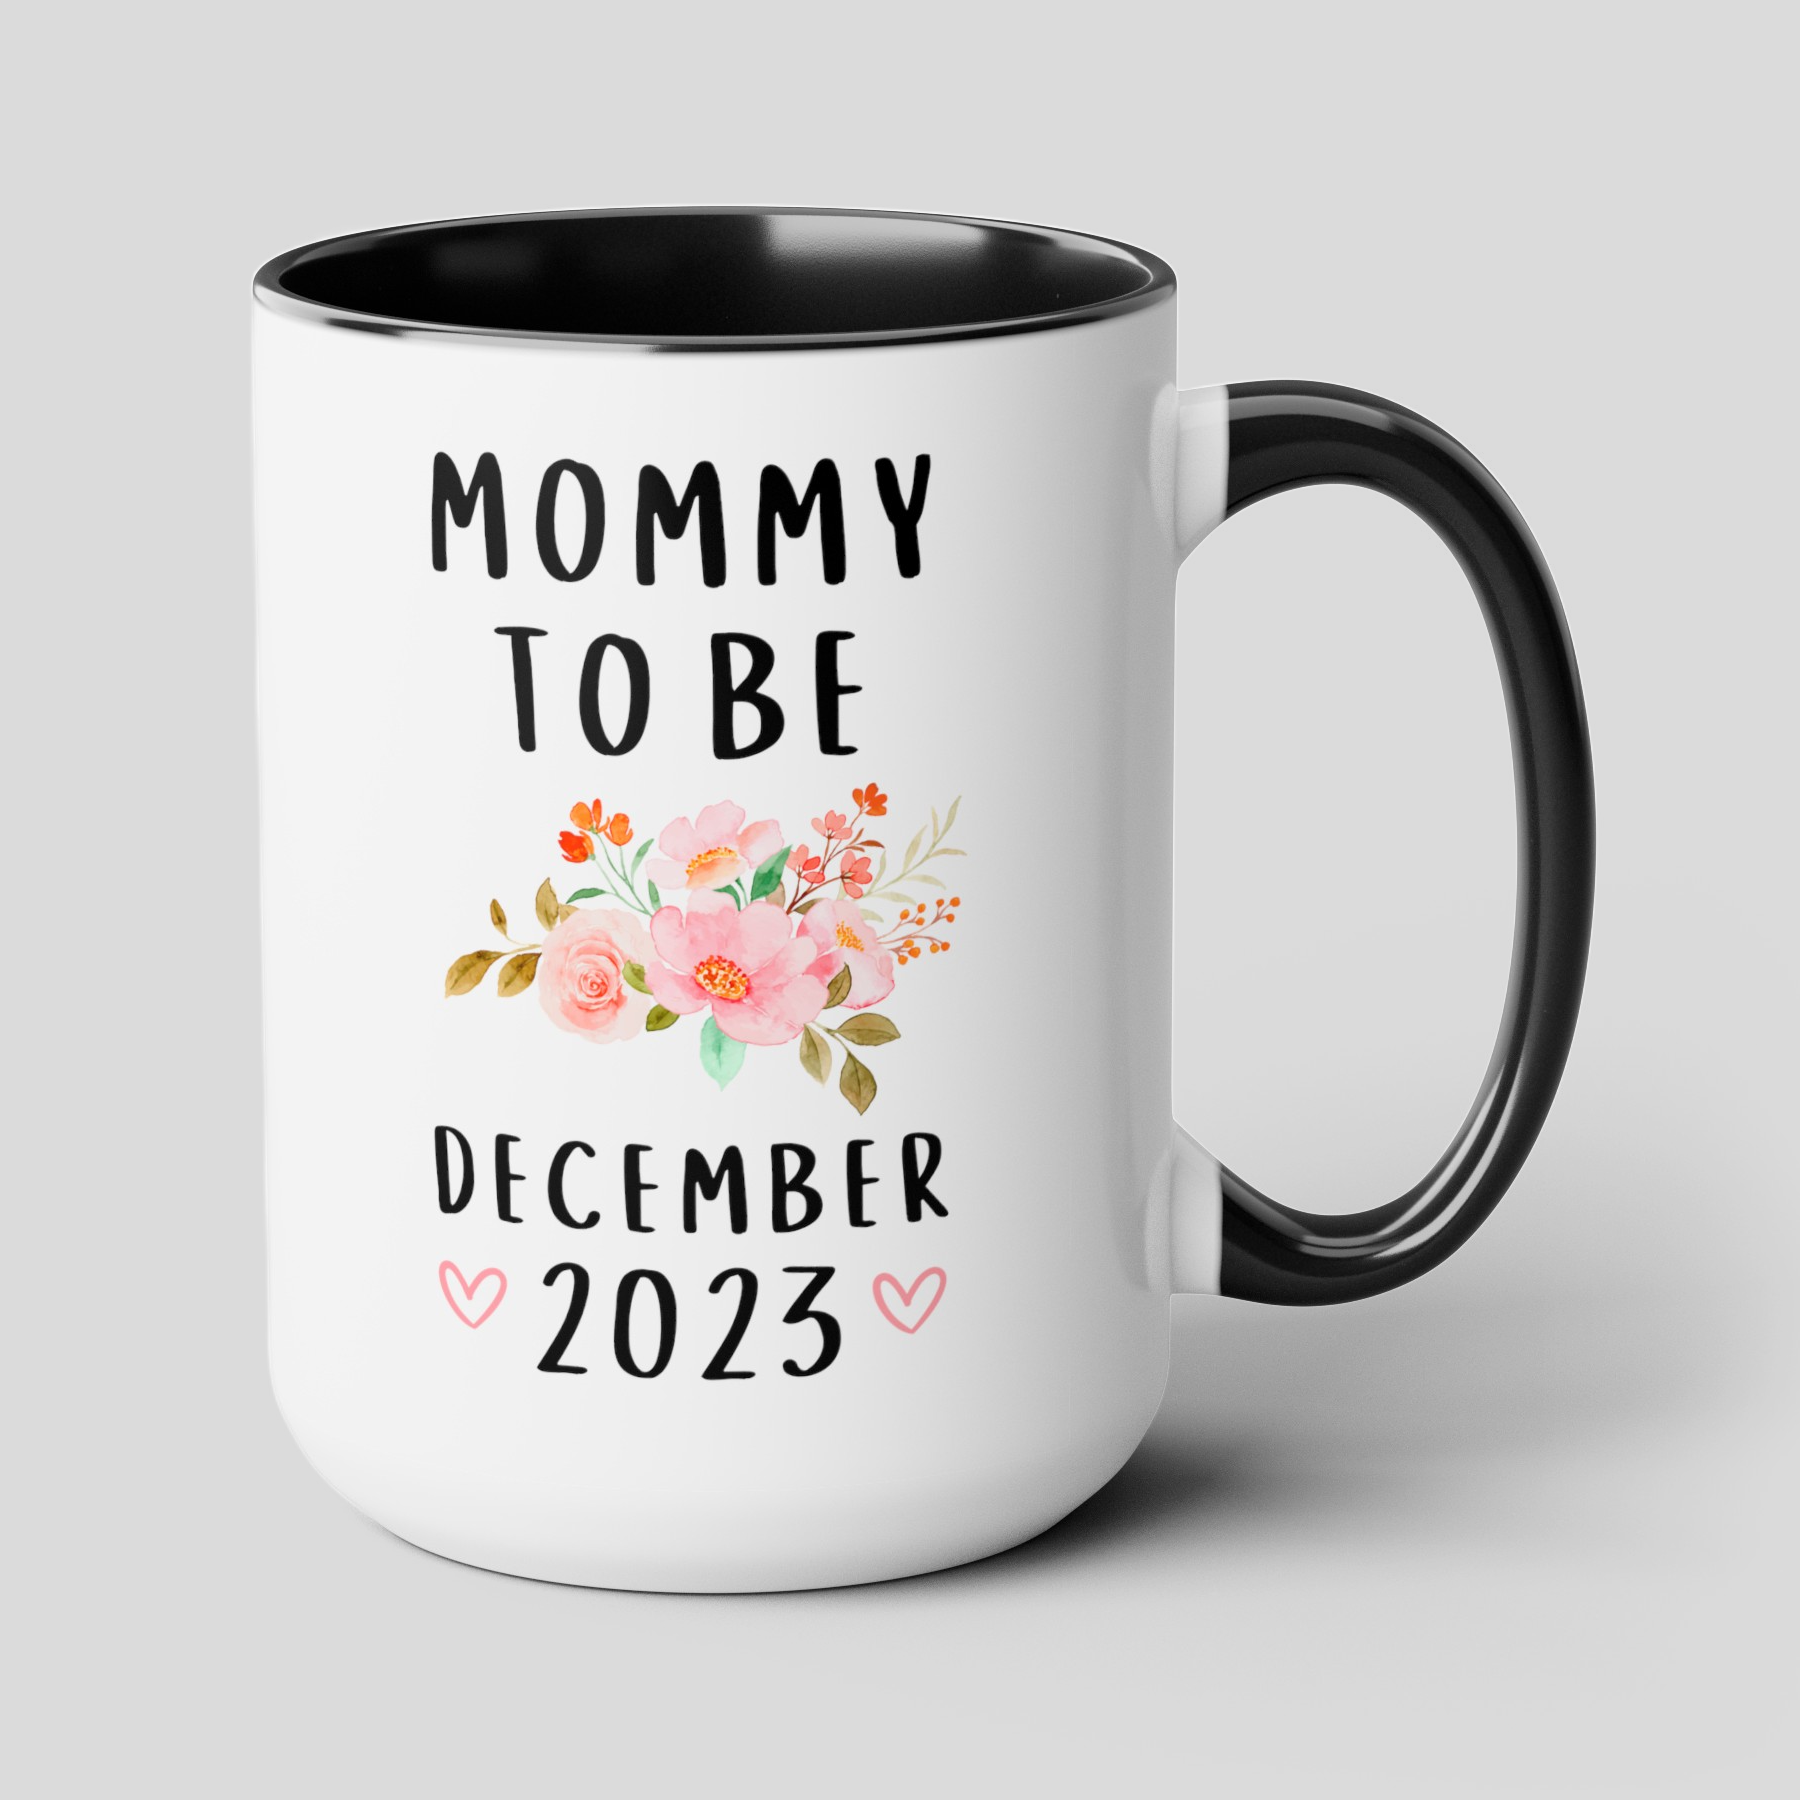 Mommy to Be 15oz white with black accent funny large coffee mug gift for future mother new mom pregnancy announcement due date floral mum personalized custom waveywares wavey wares wavywares wavy wares cover